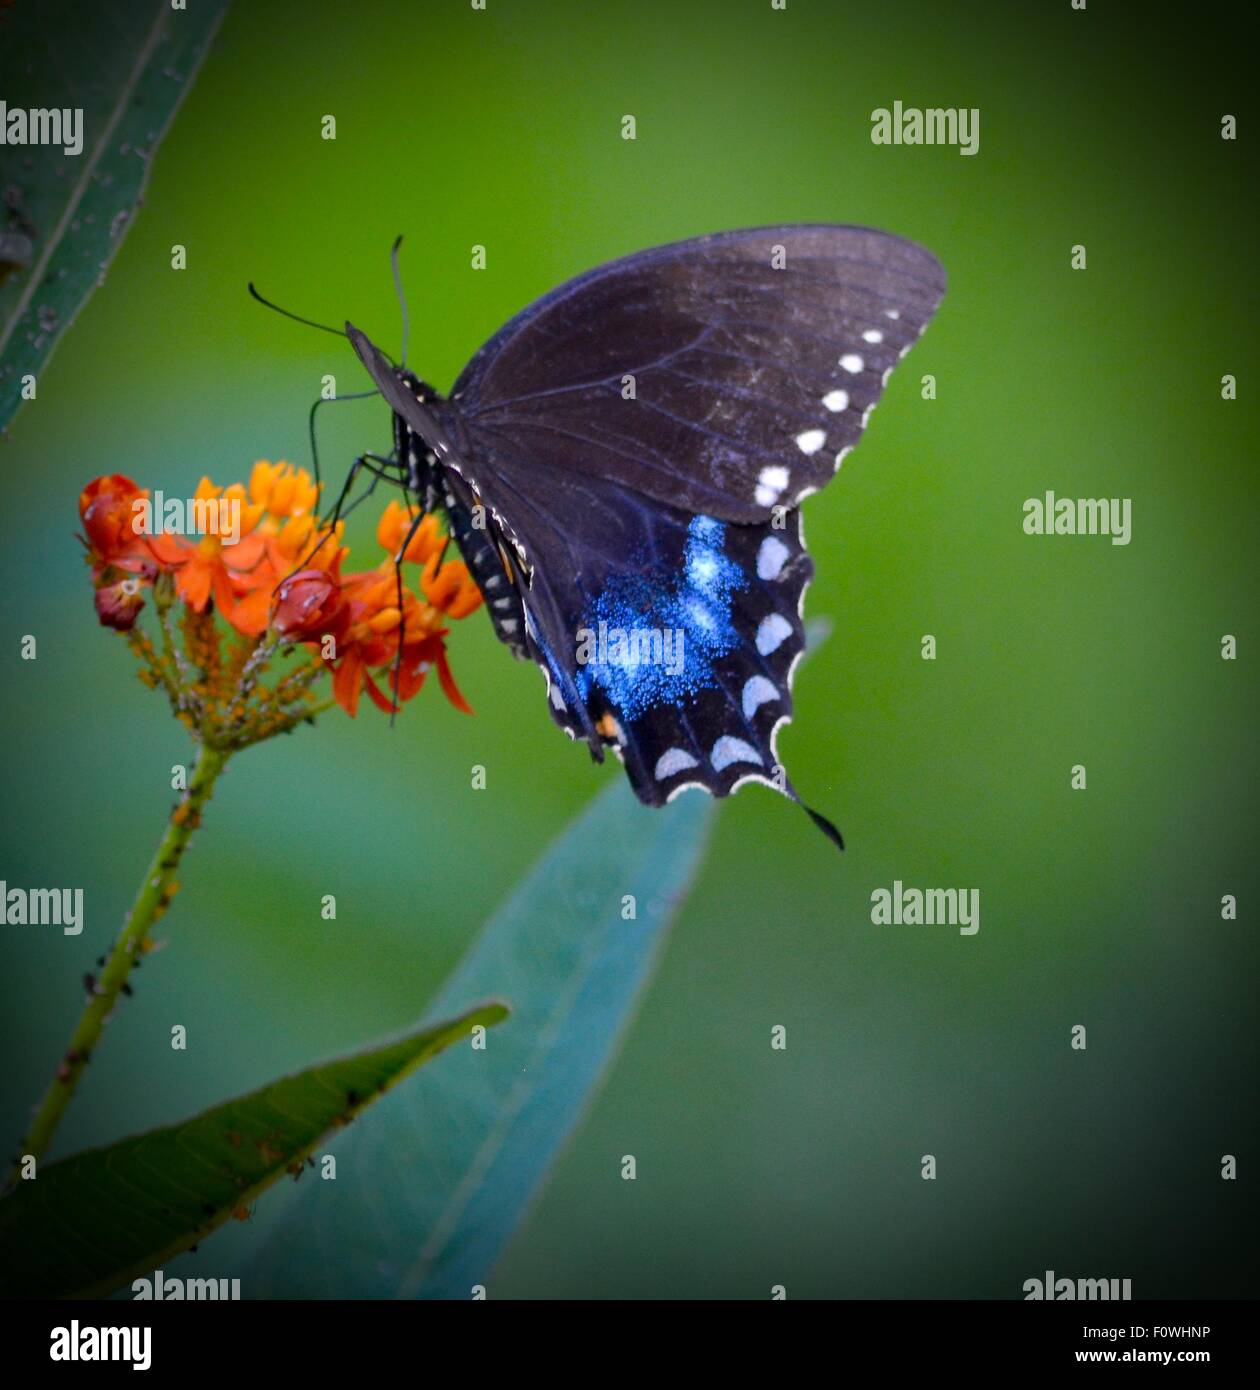 Black swallowtail butterfly, faune, insecte Banque D'Images